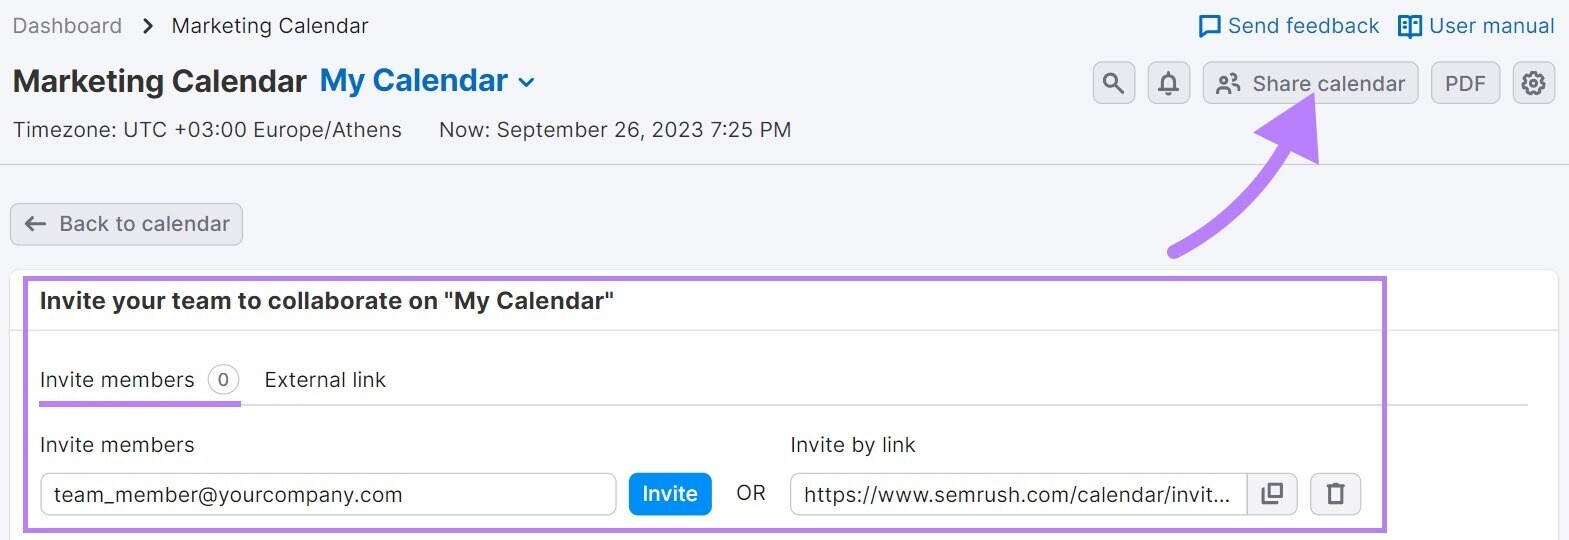 Invite your team to collaborate on "My Calendar"